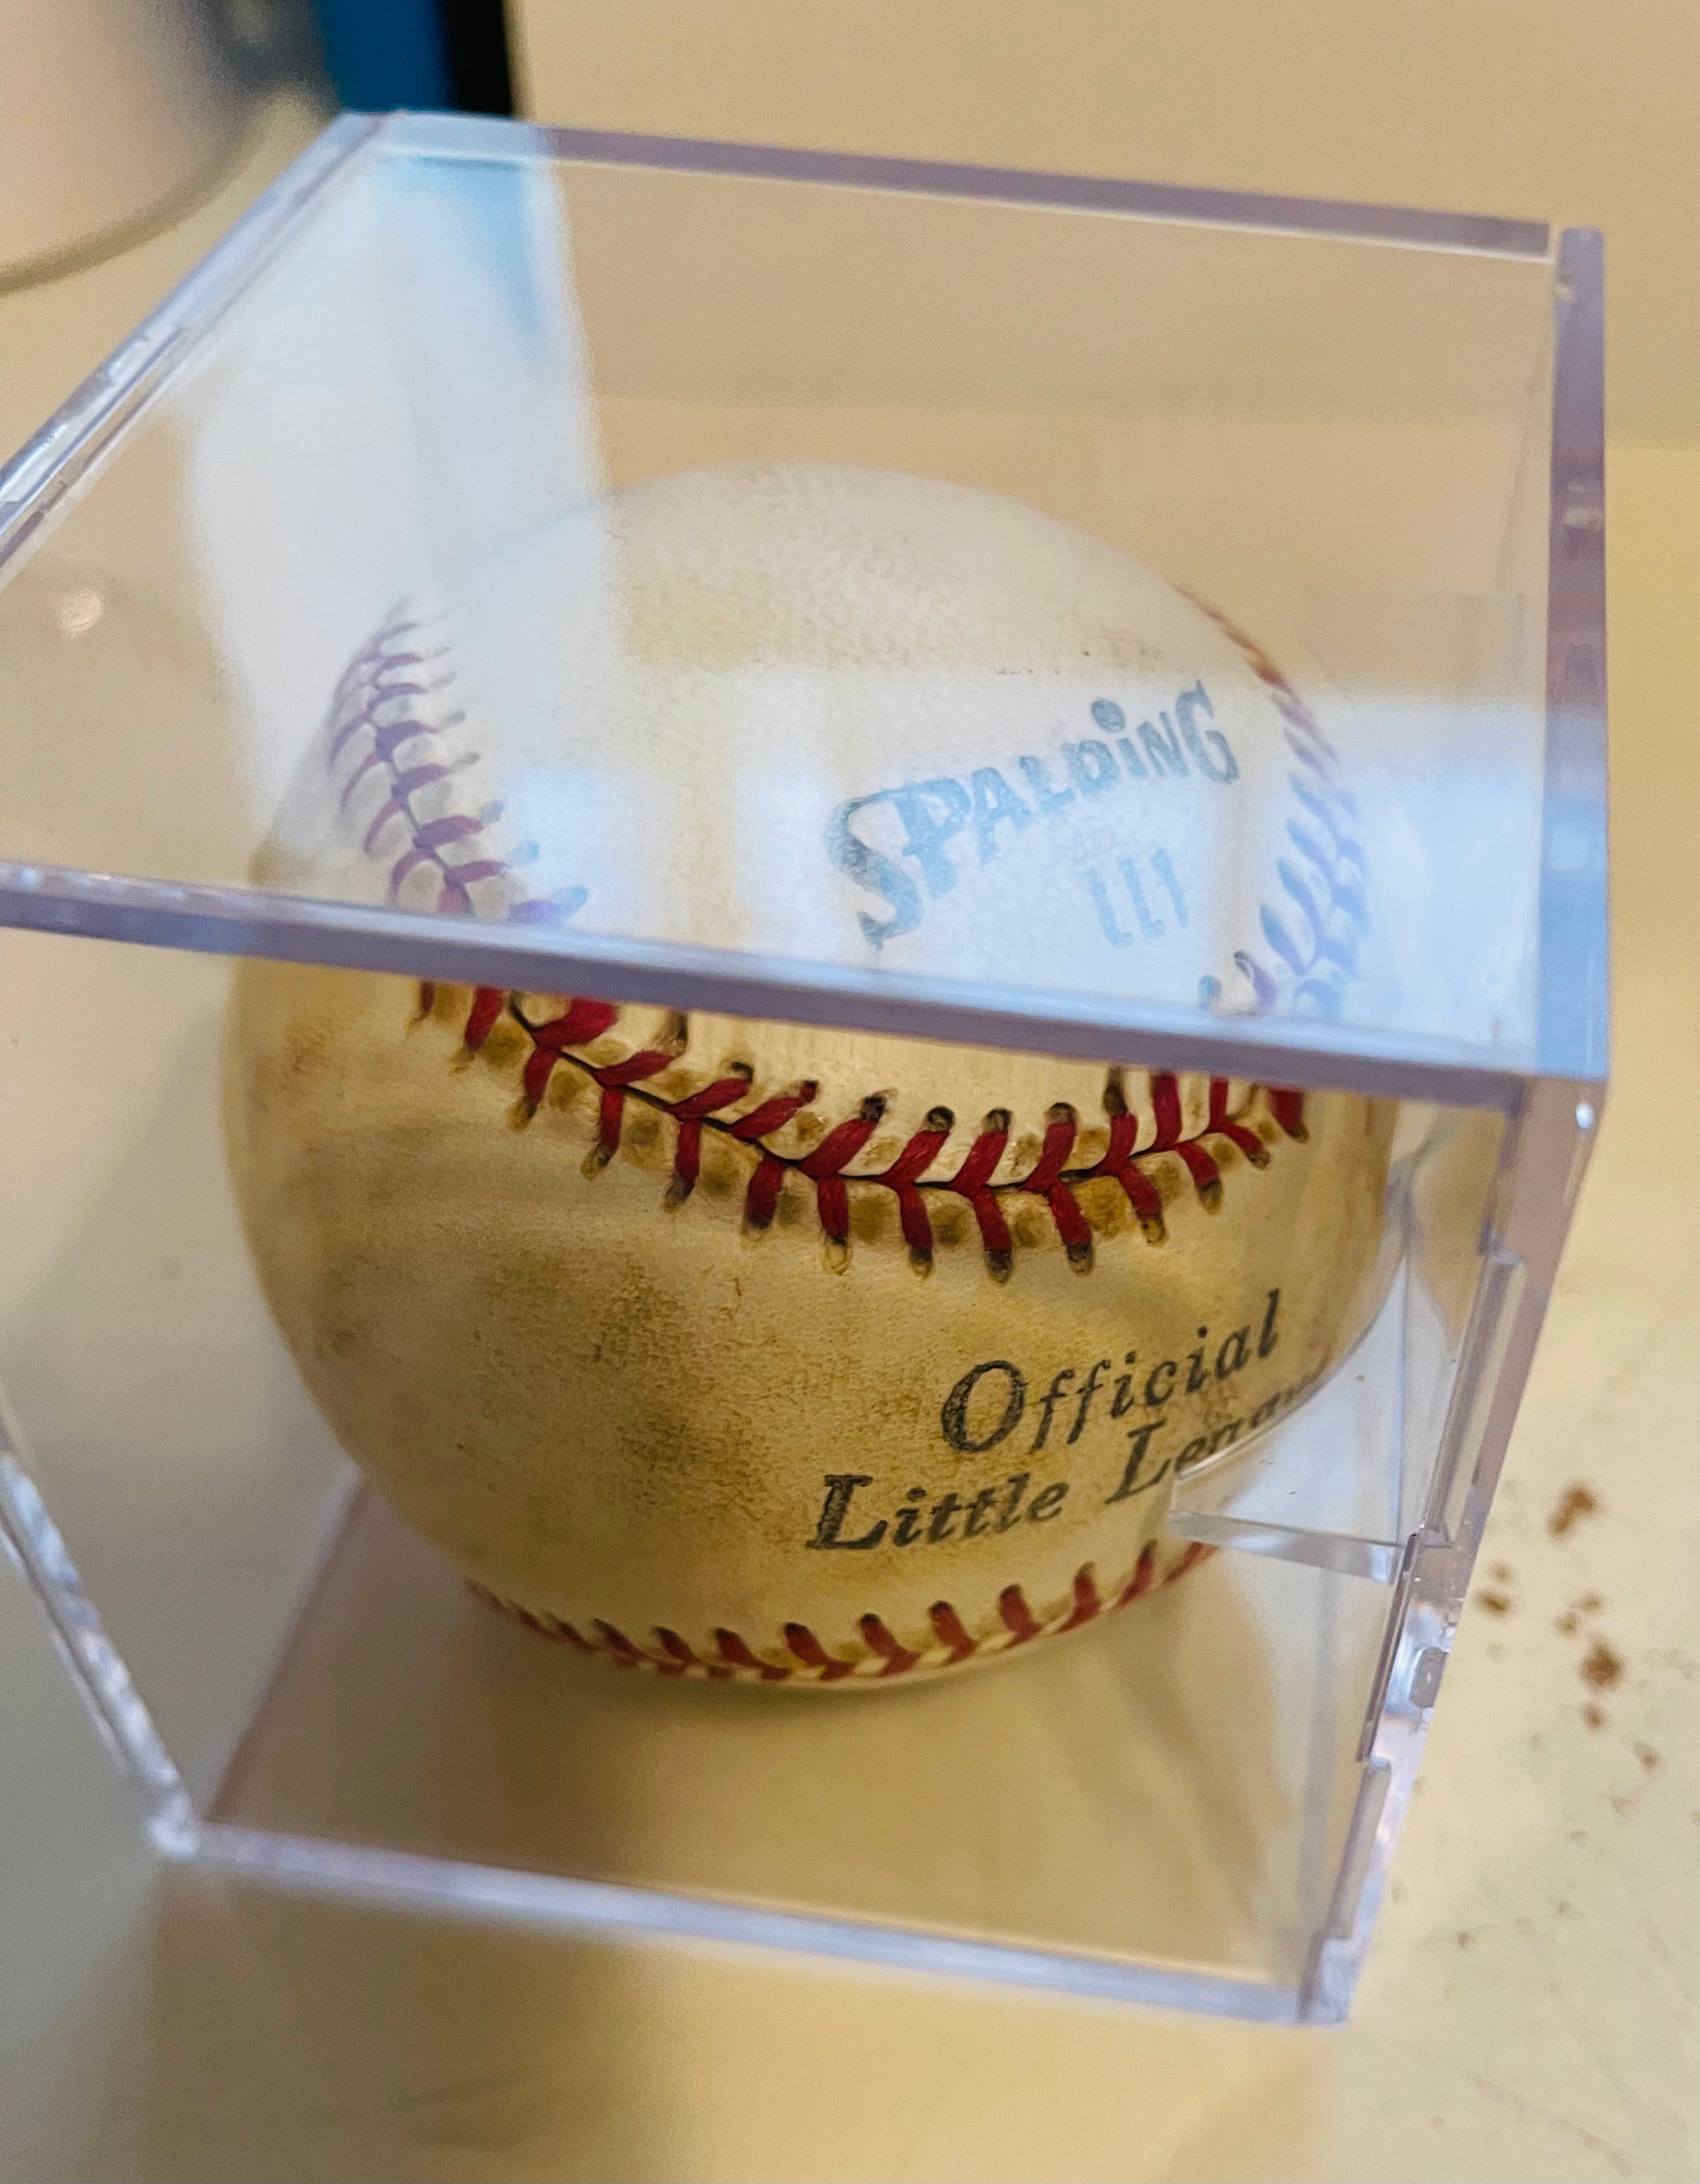 Mickey Mantle autographed baseball with case and COA